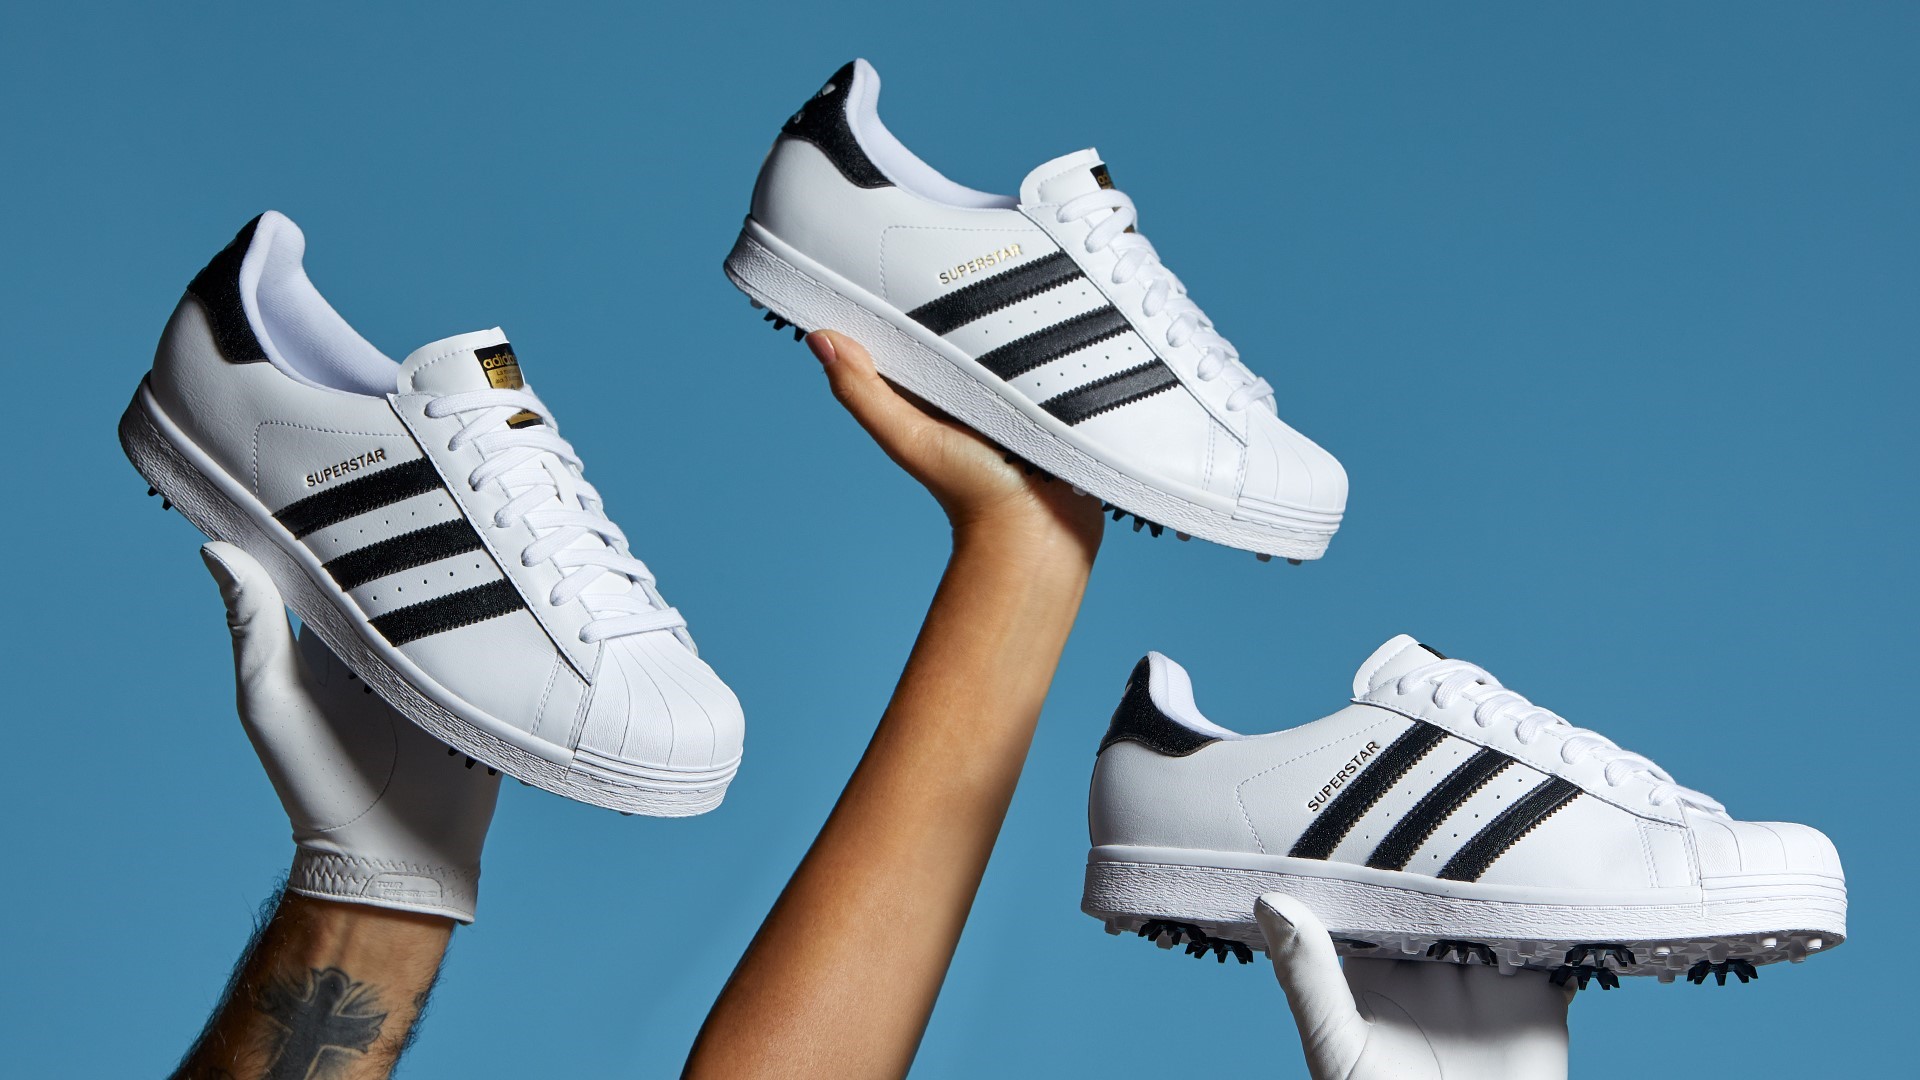 Glorious Purchase A faithful Limited Edition Superstar Brings Iconic 3-Stripes Footwear to the Course